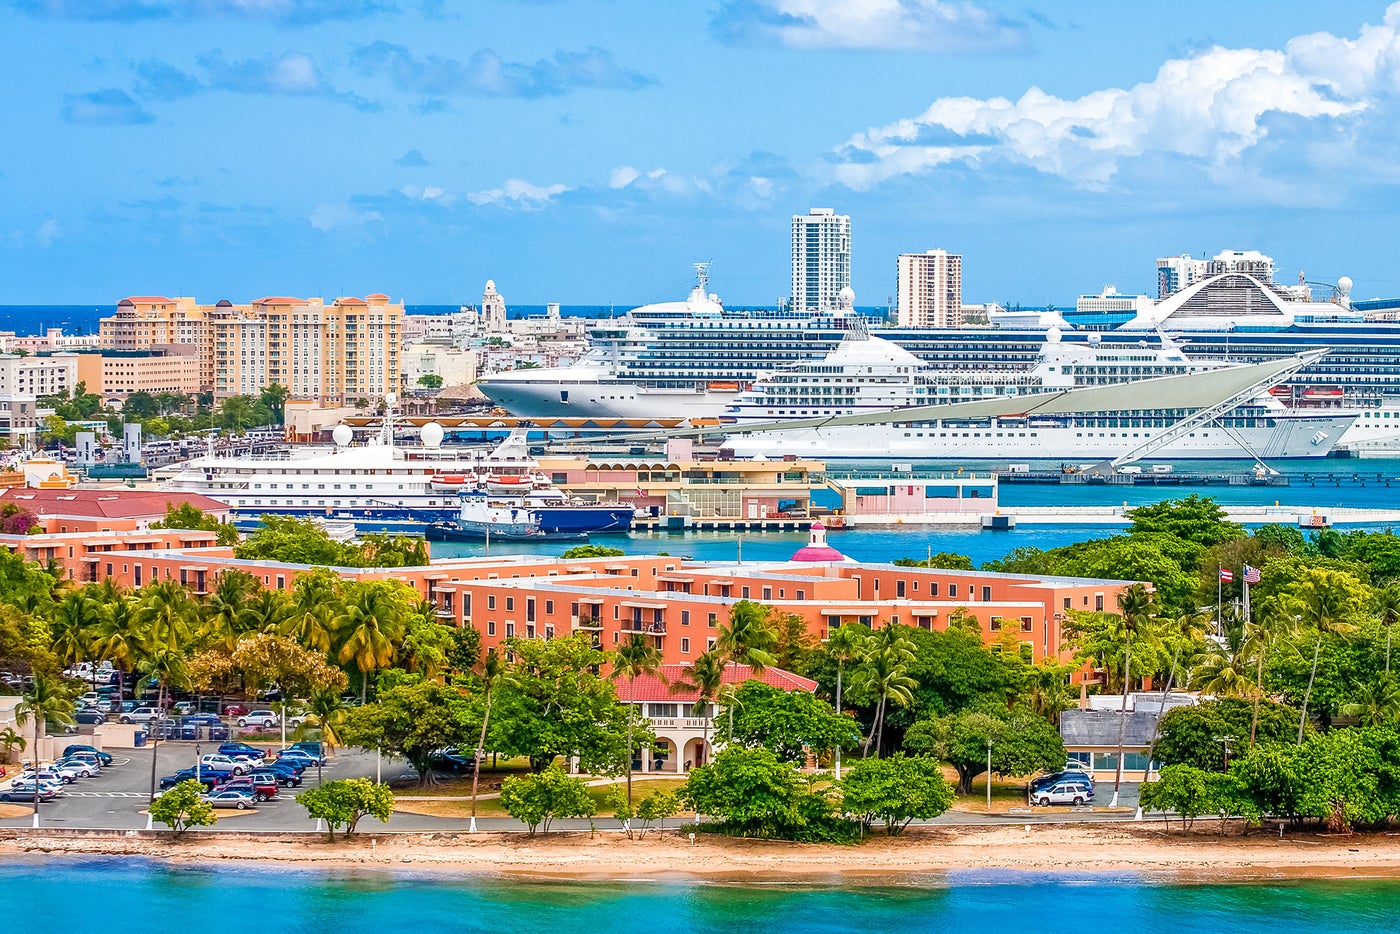 50 Best Things To Do In San Juan Cruise Port 2022 | Porn Sex Picture